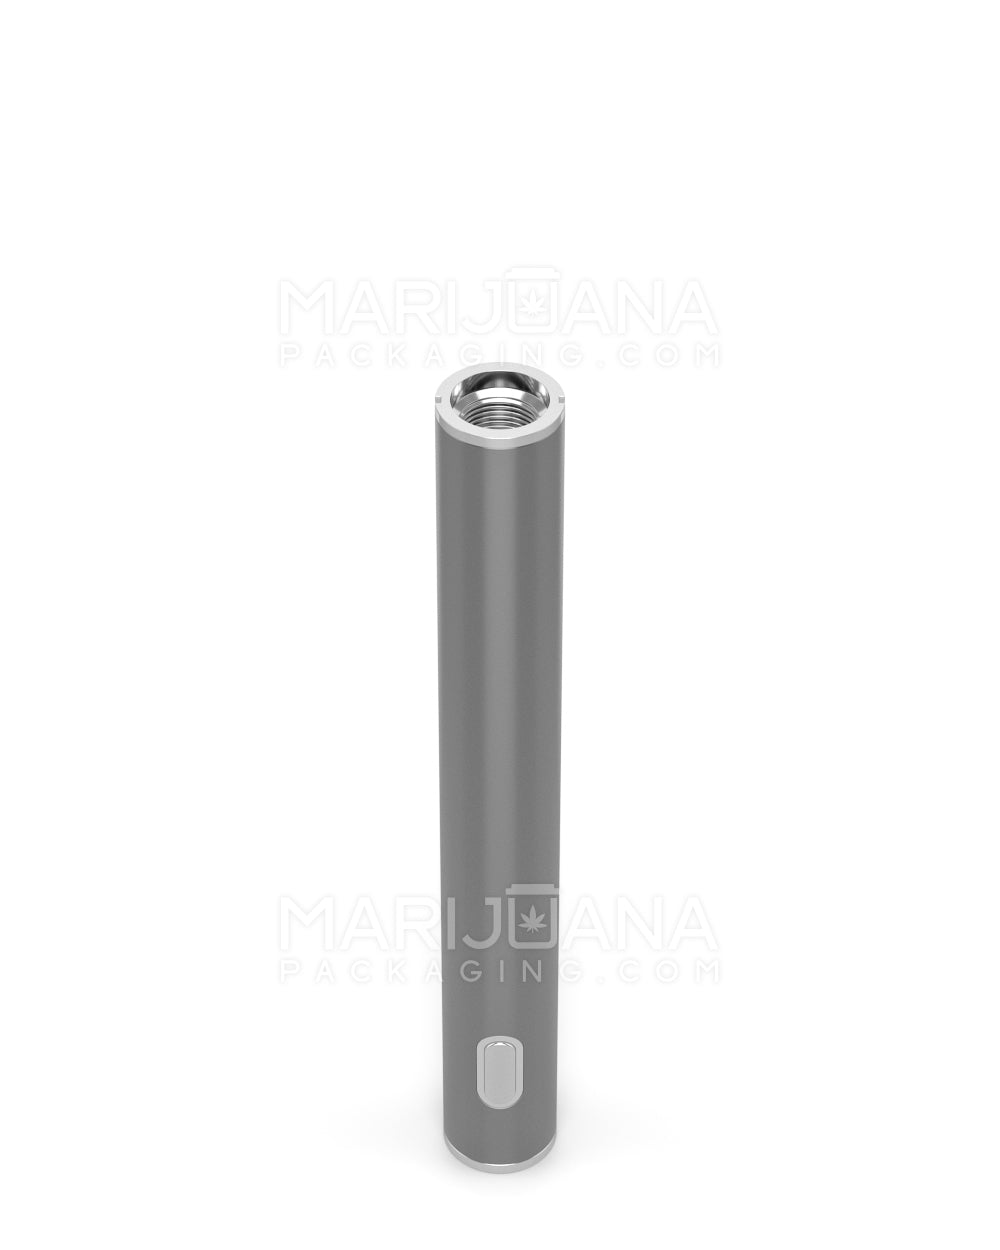 RAE | Instant Draw Activated Vape Battery | 180mAh - Silver - 80 Count - 3